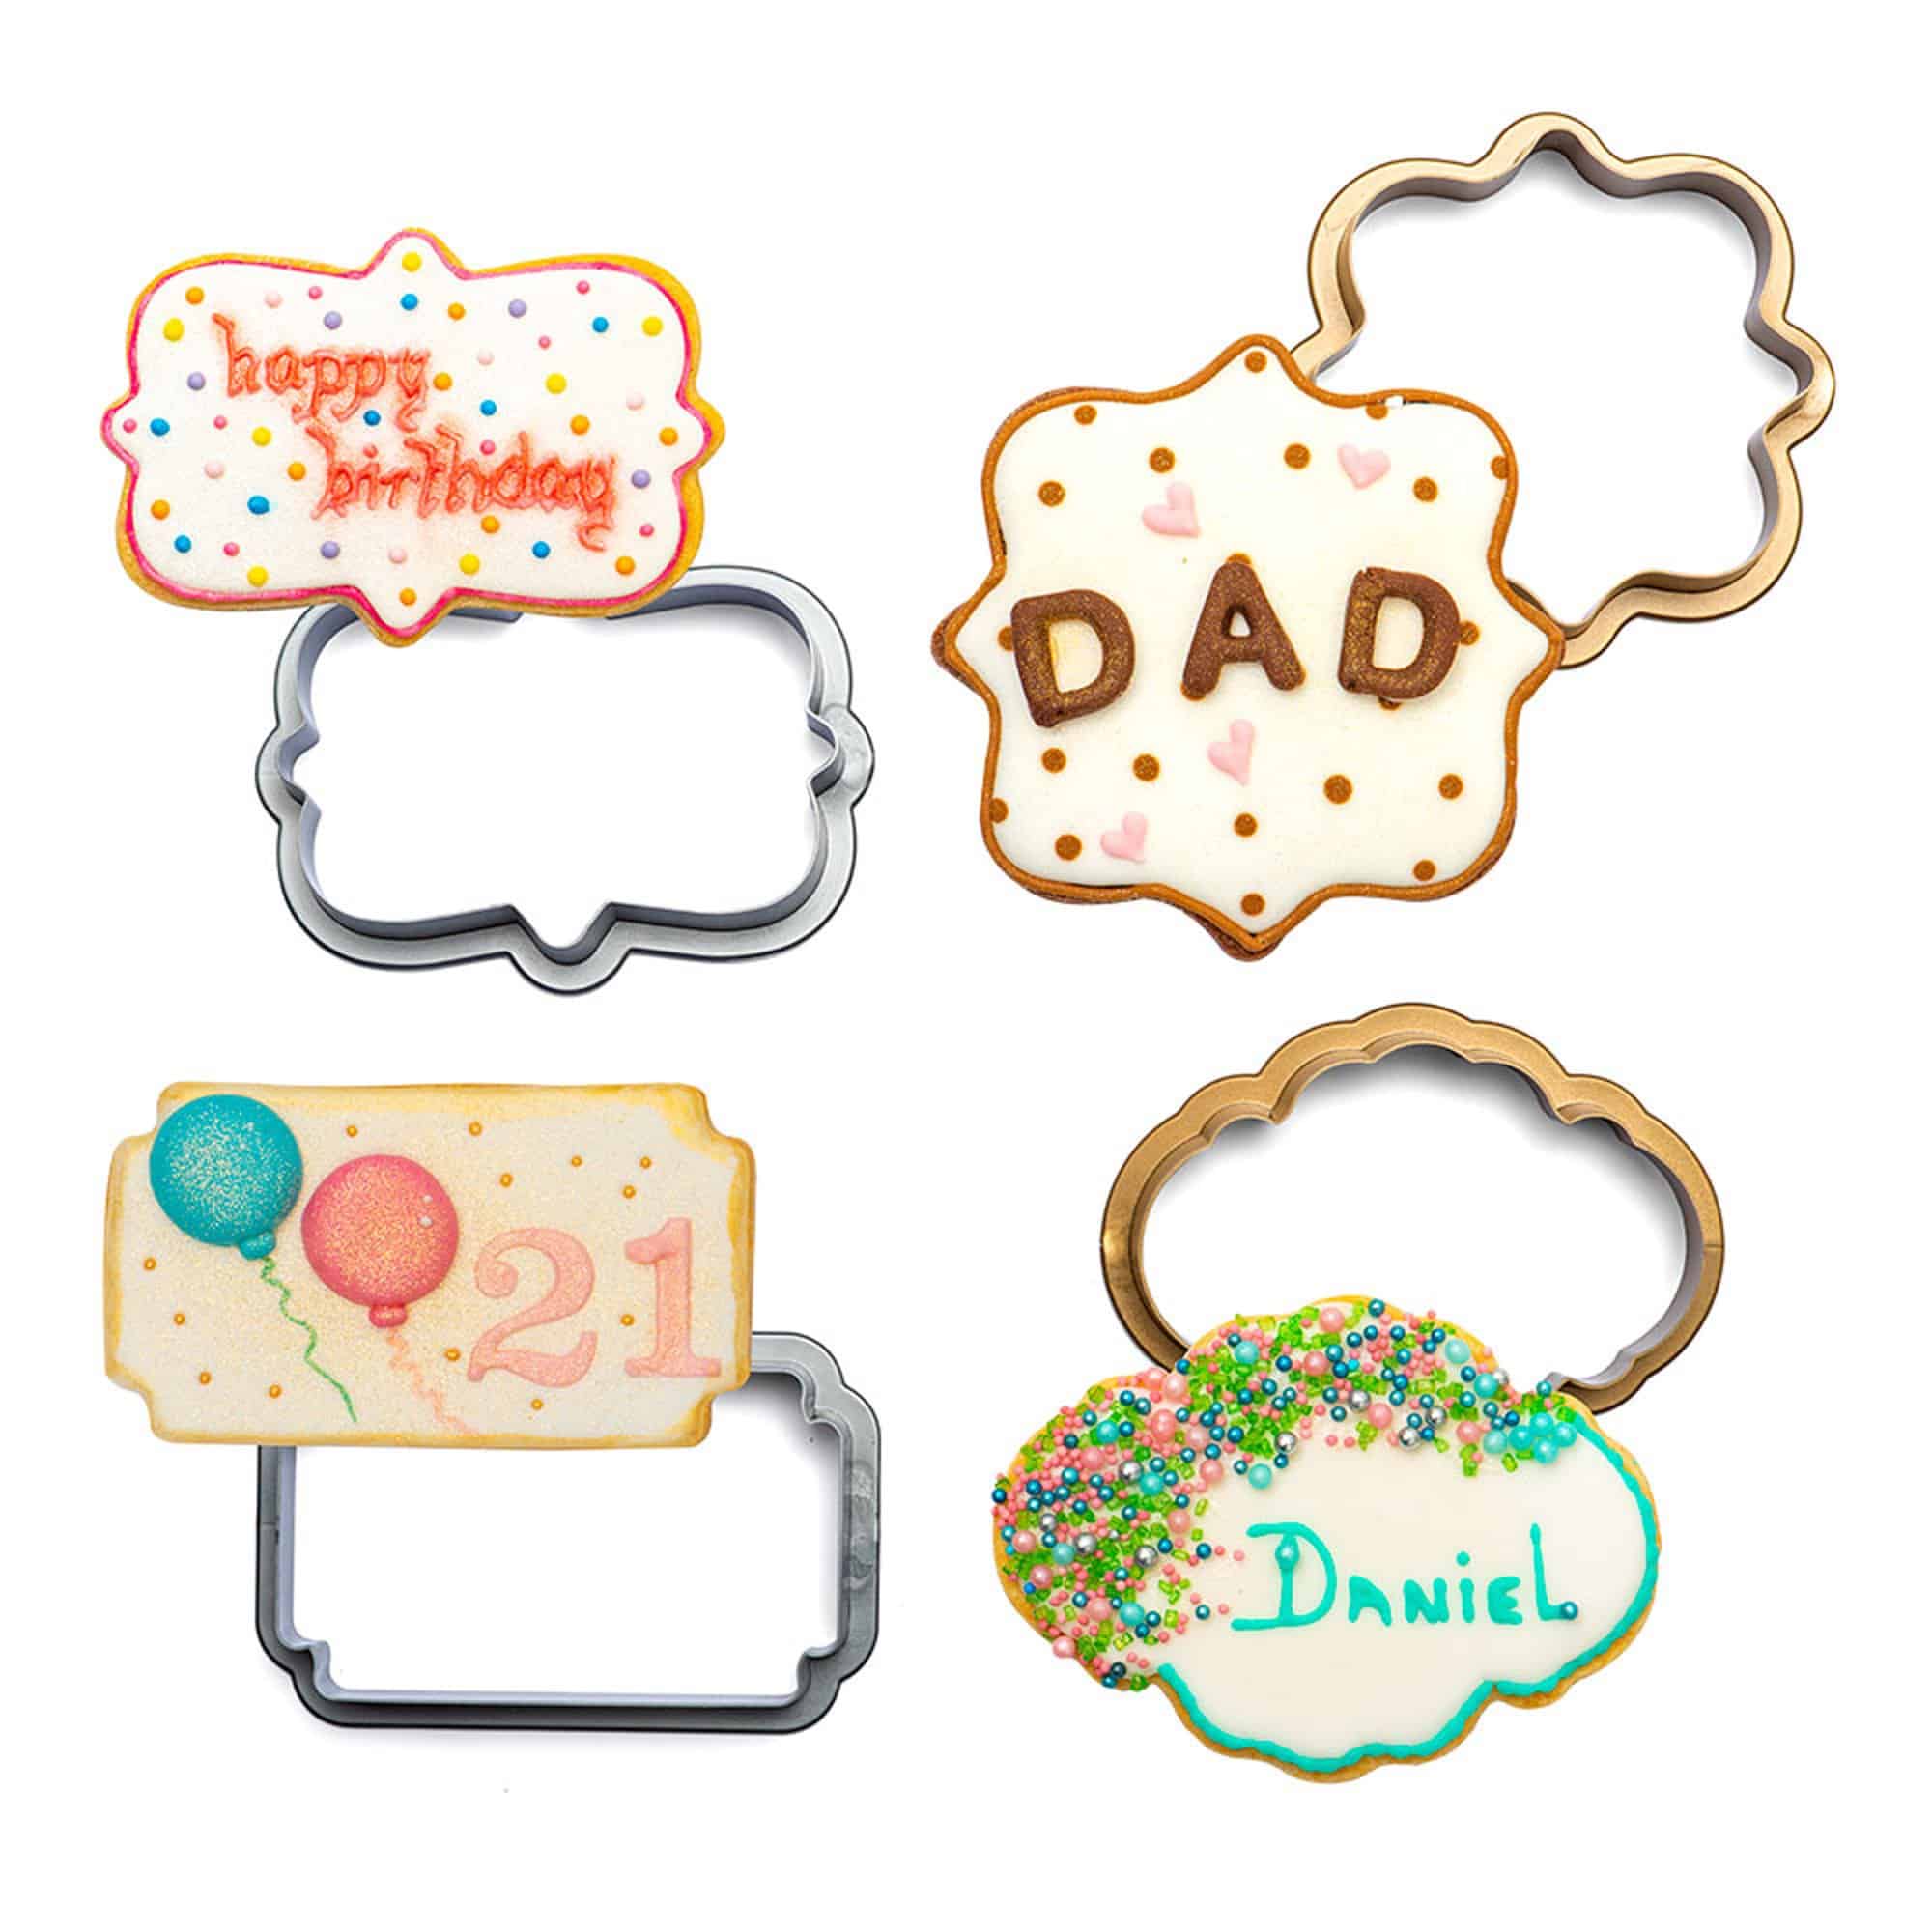 Decora Cookie Cutters Frames Set Of 4